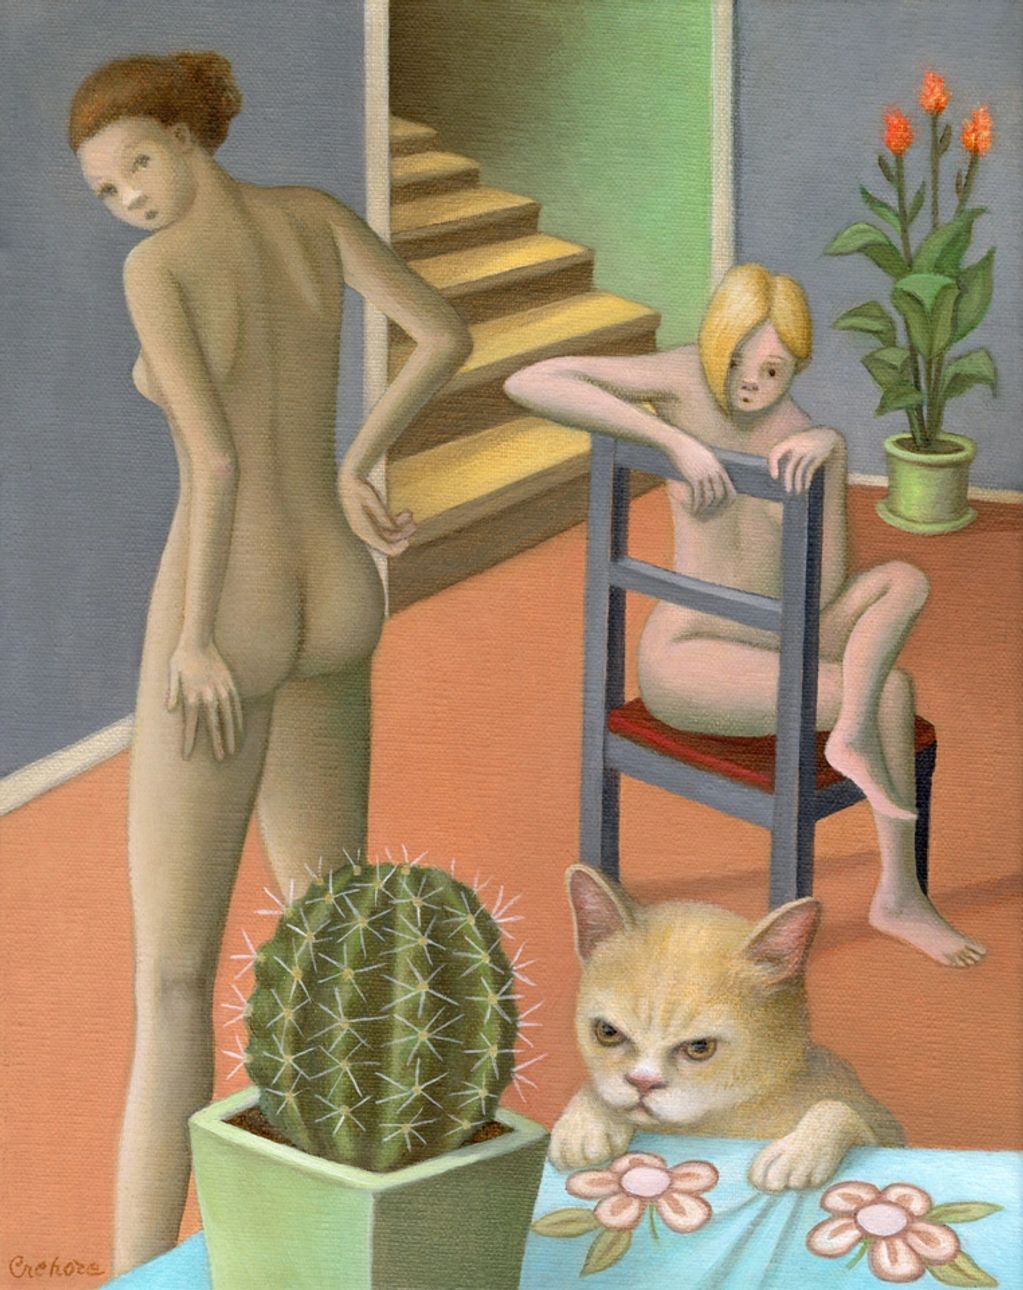 Disgruntled cat staring at cactus with two nude girls in a room